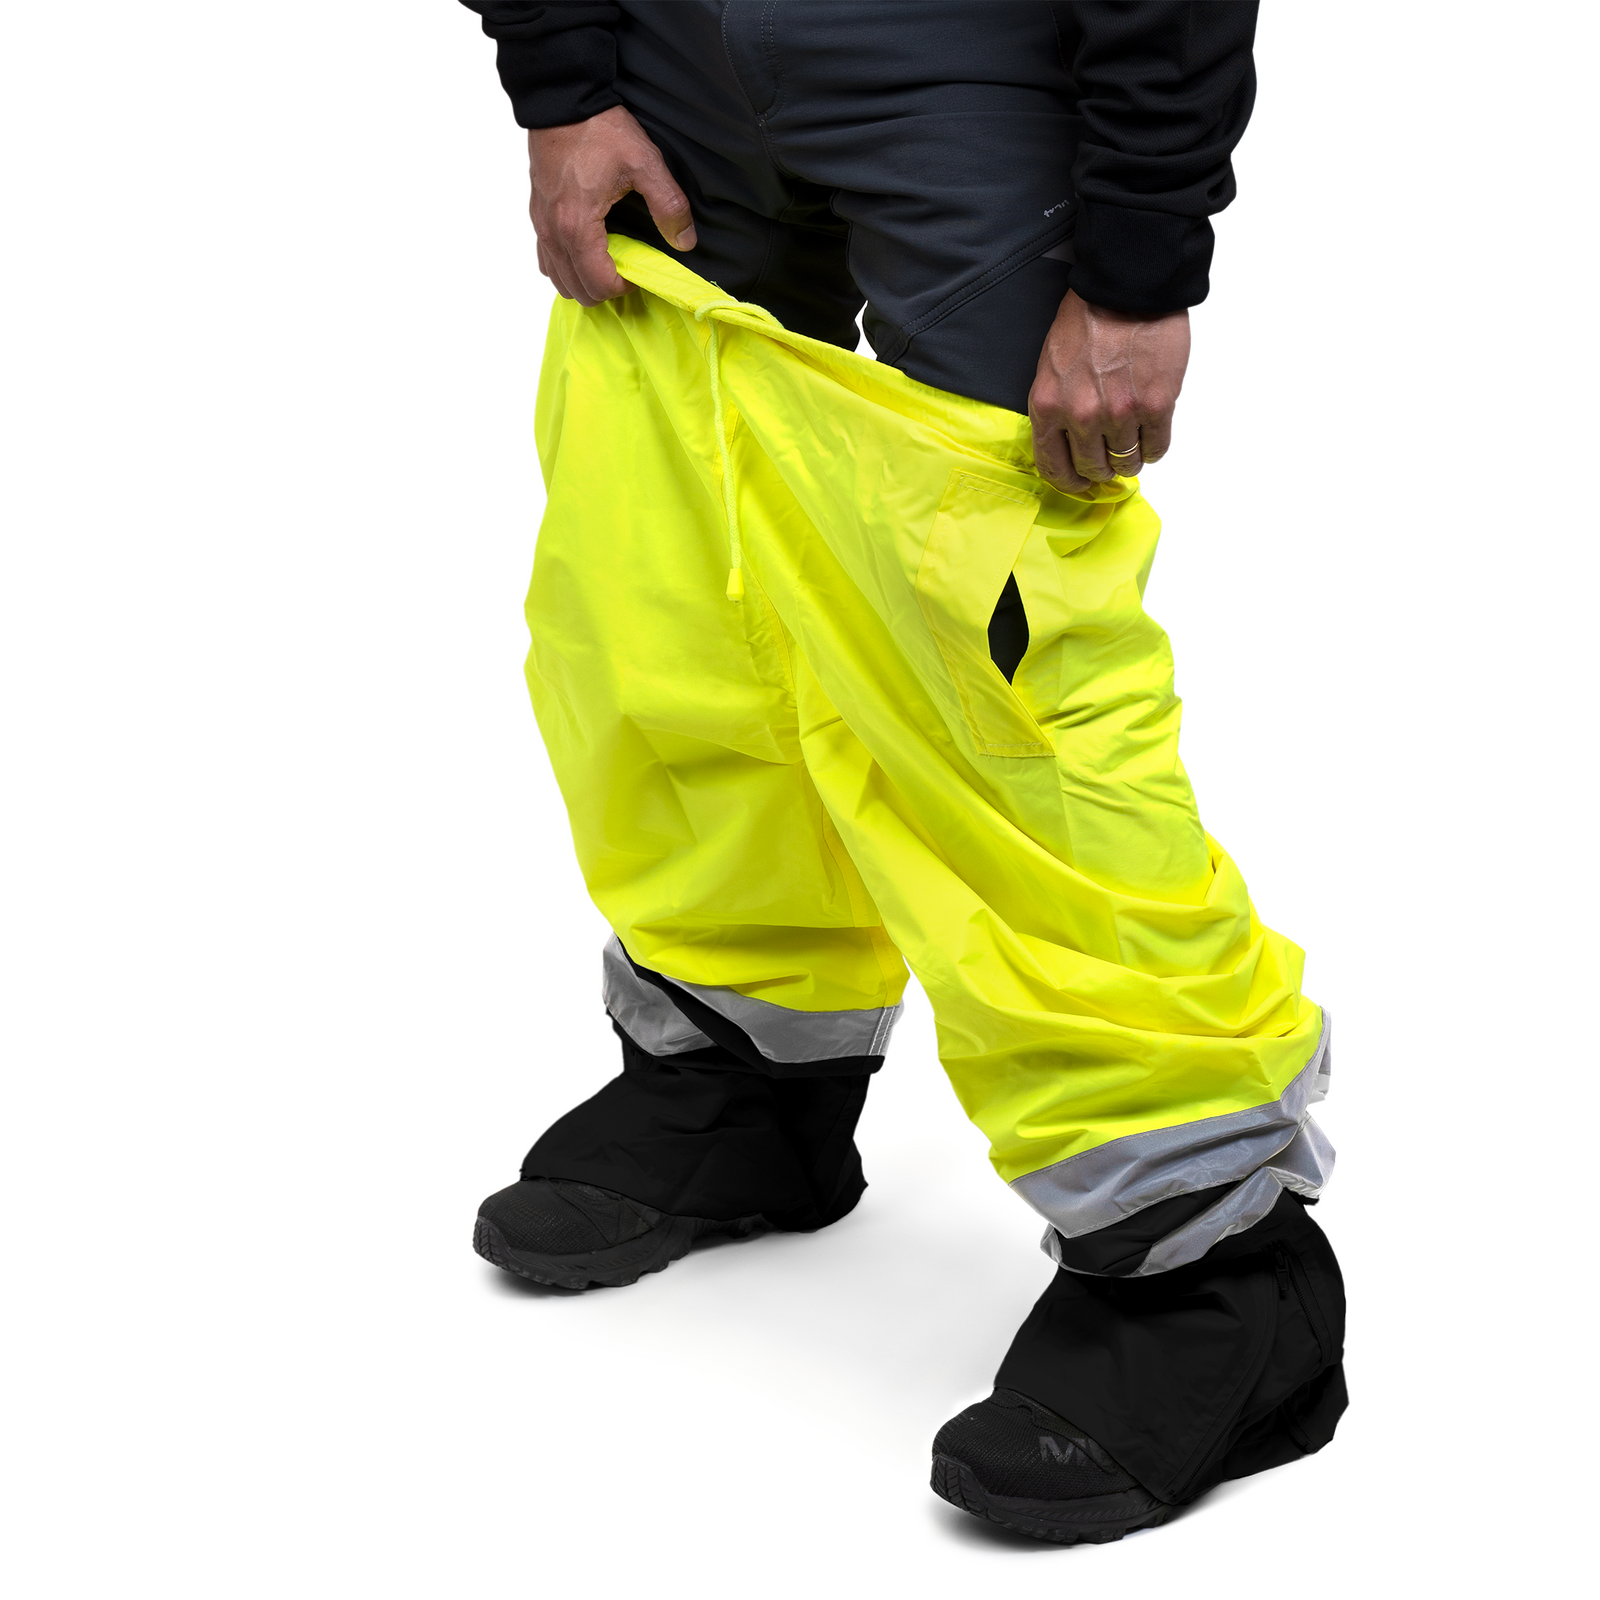 A person putting on the JORESTECH yellow and black safety rain pants with reflective strips